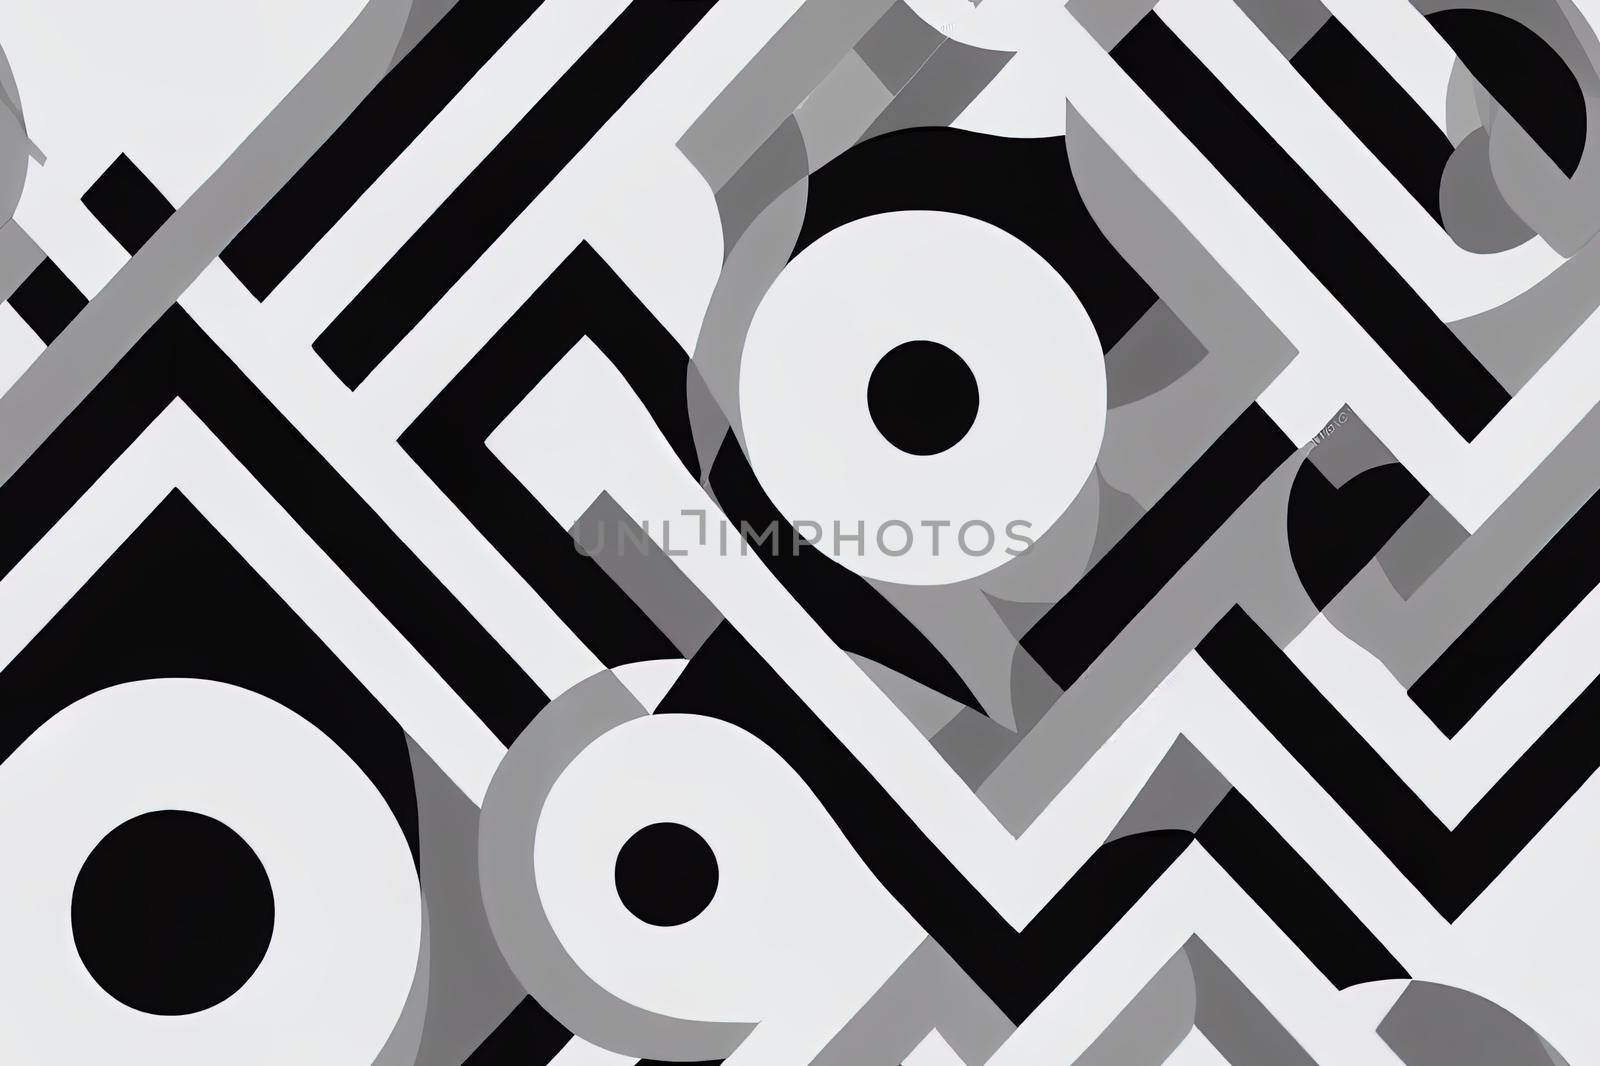 Abstract geometric pattern with stripes, lines. Seamless 2d background. White and grey ornament. Simple lattice graphic design.